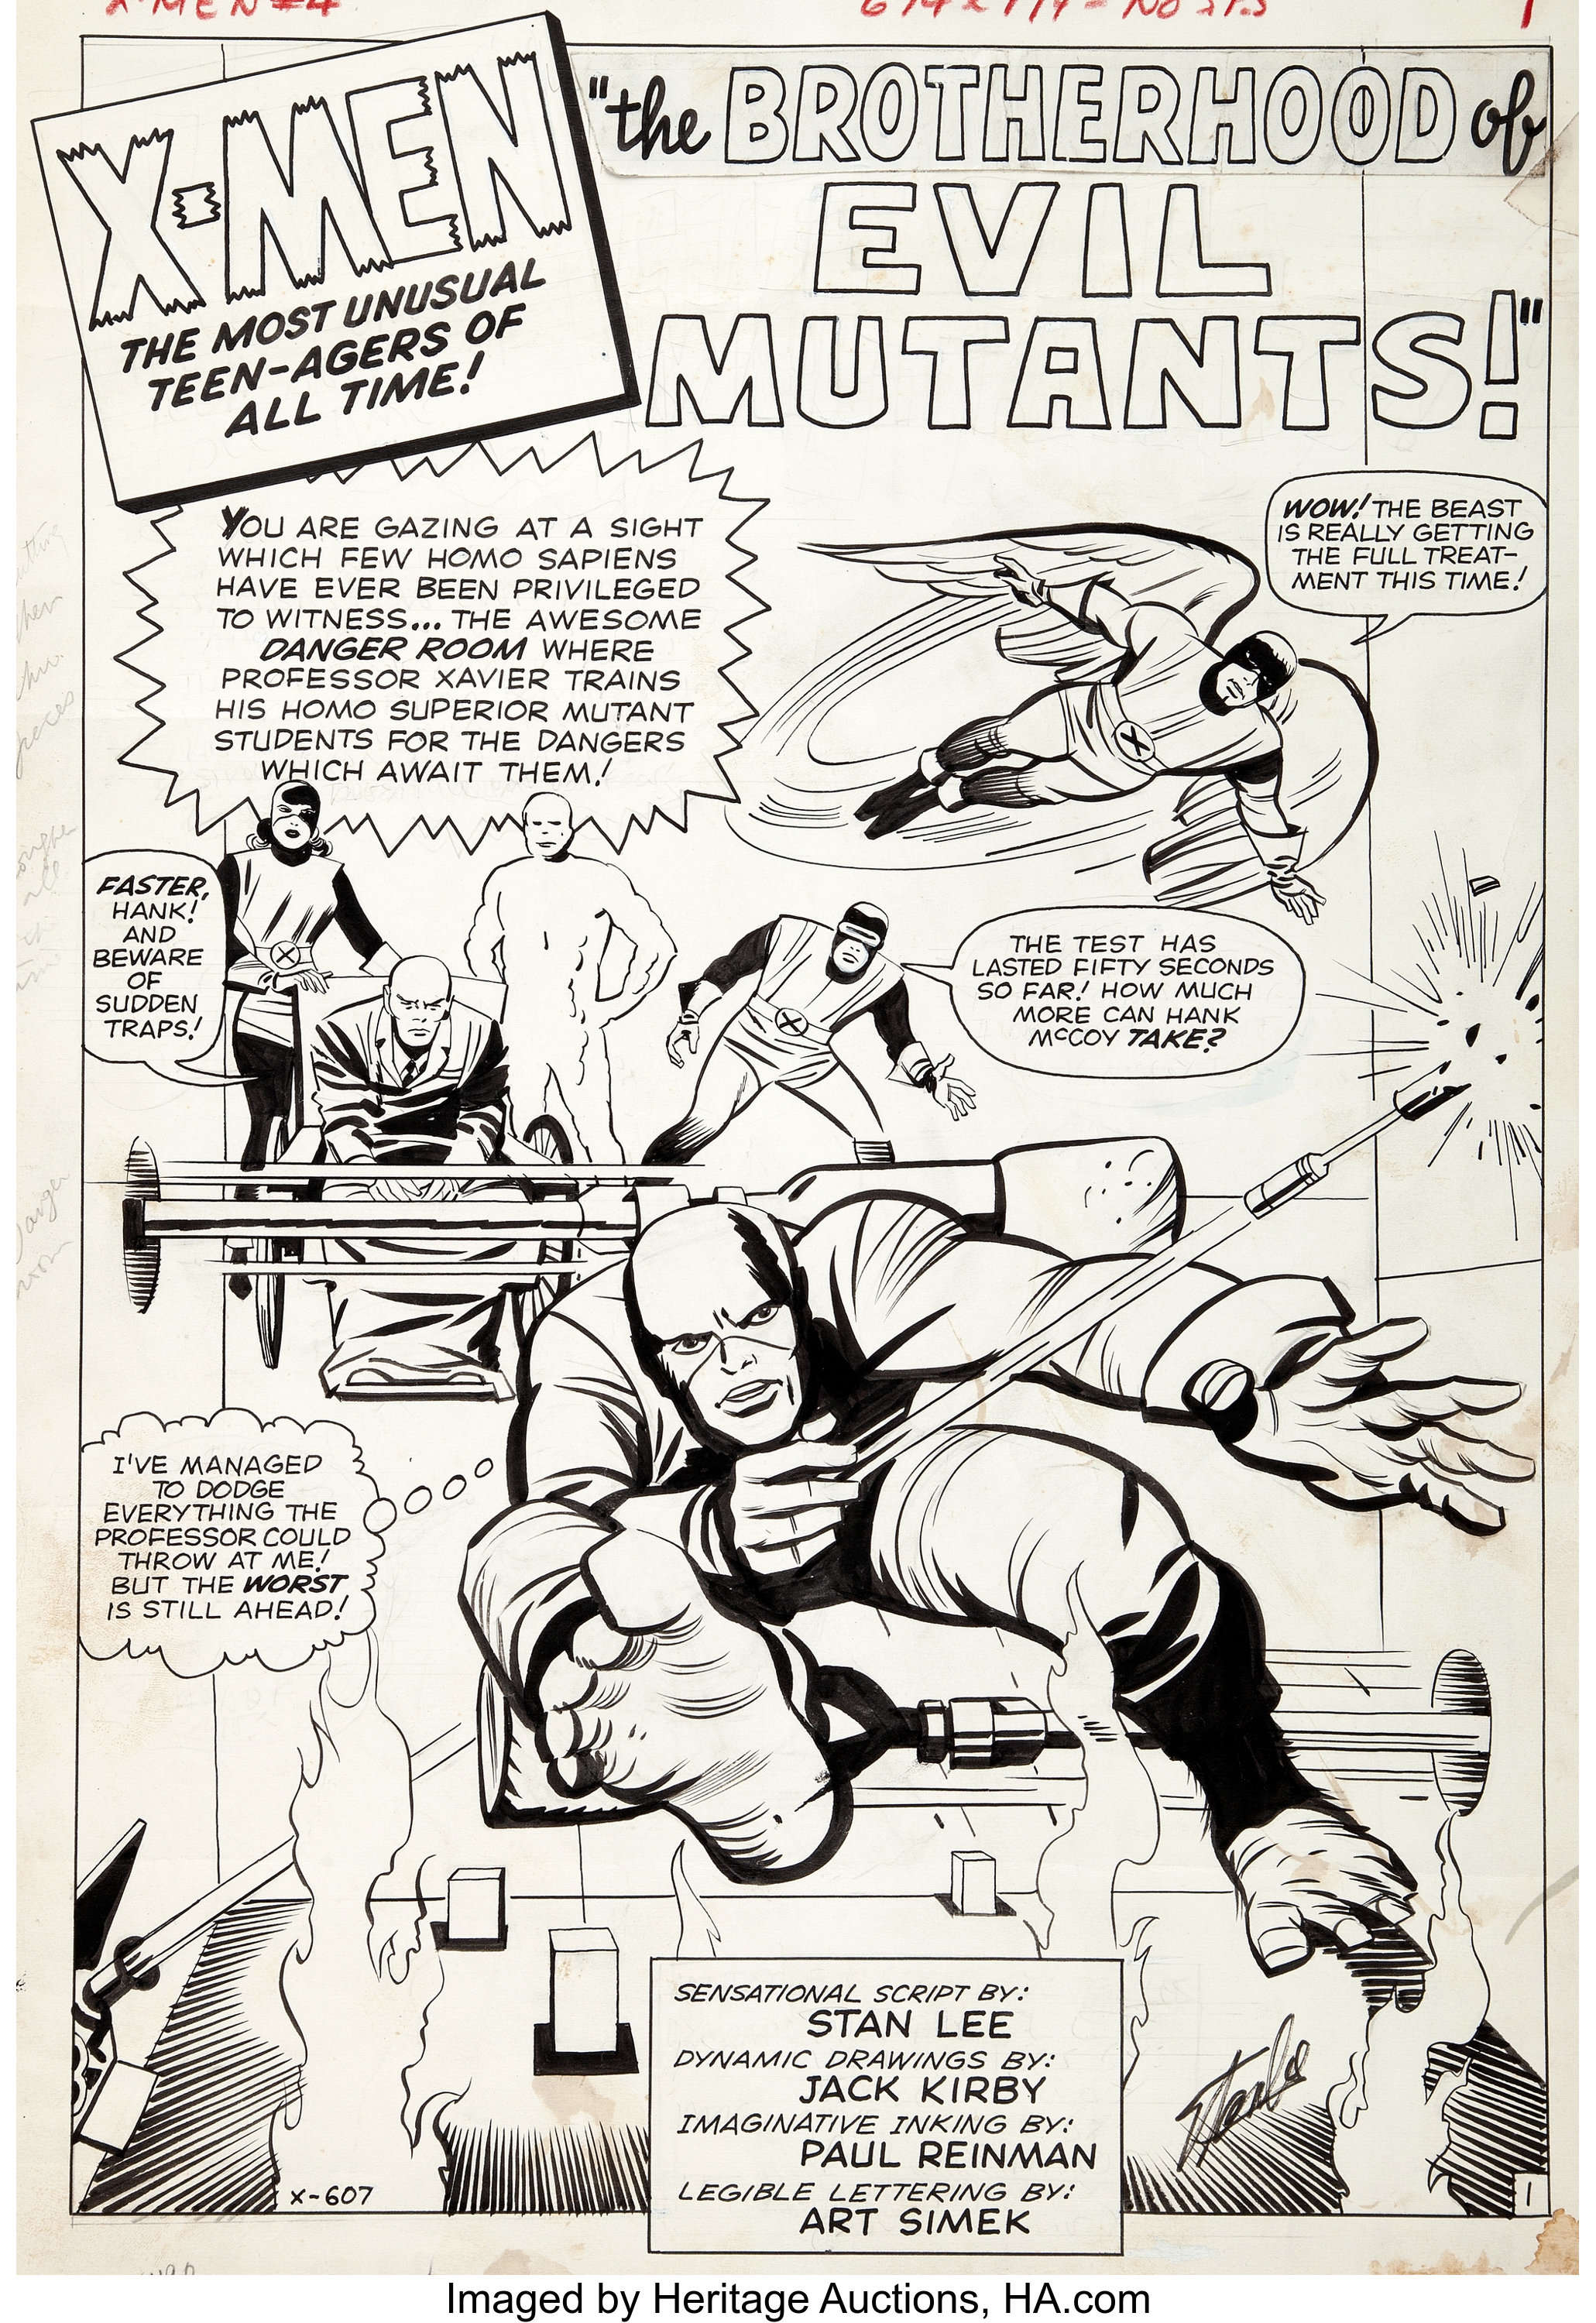 01-Jack Kirby and Paul Reinman X-Men #4 Splash Page credit Heritage Auctions